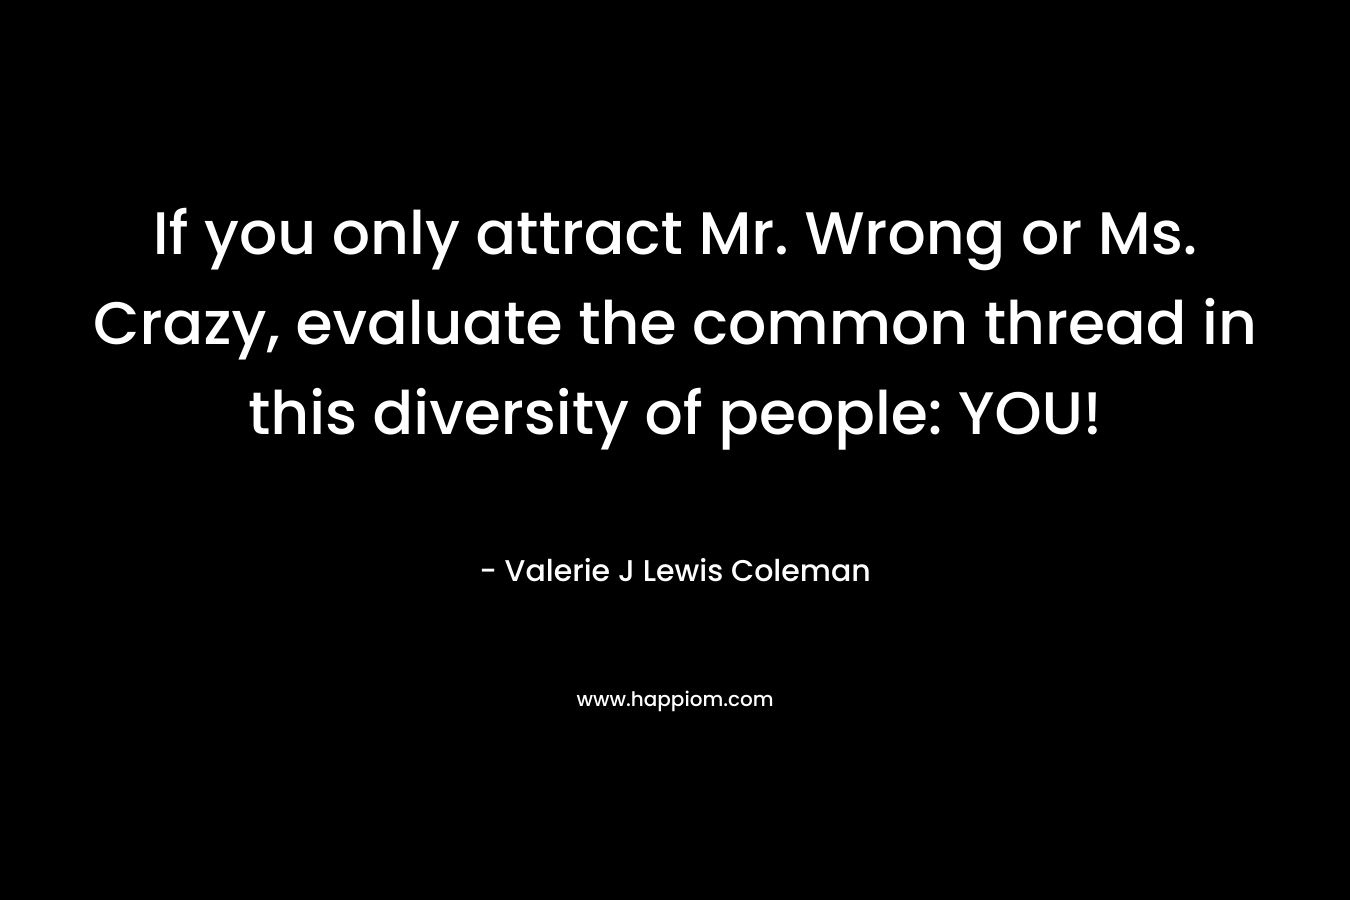 If you only attract Mr. Wrong or Ms. Crazy, evaluate the common thread in this diversity of people: YOU! – Valerie J Lewis Coleman